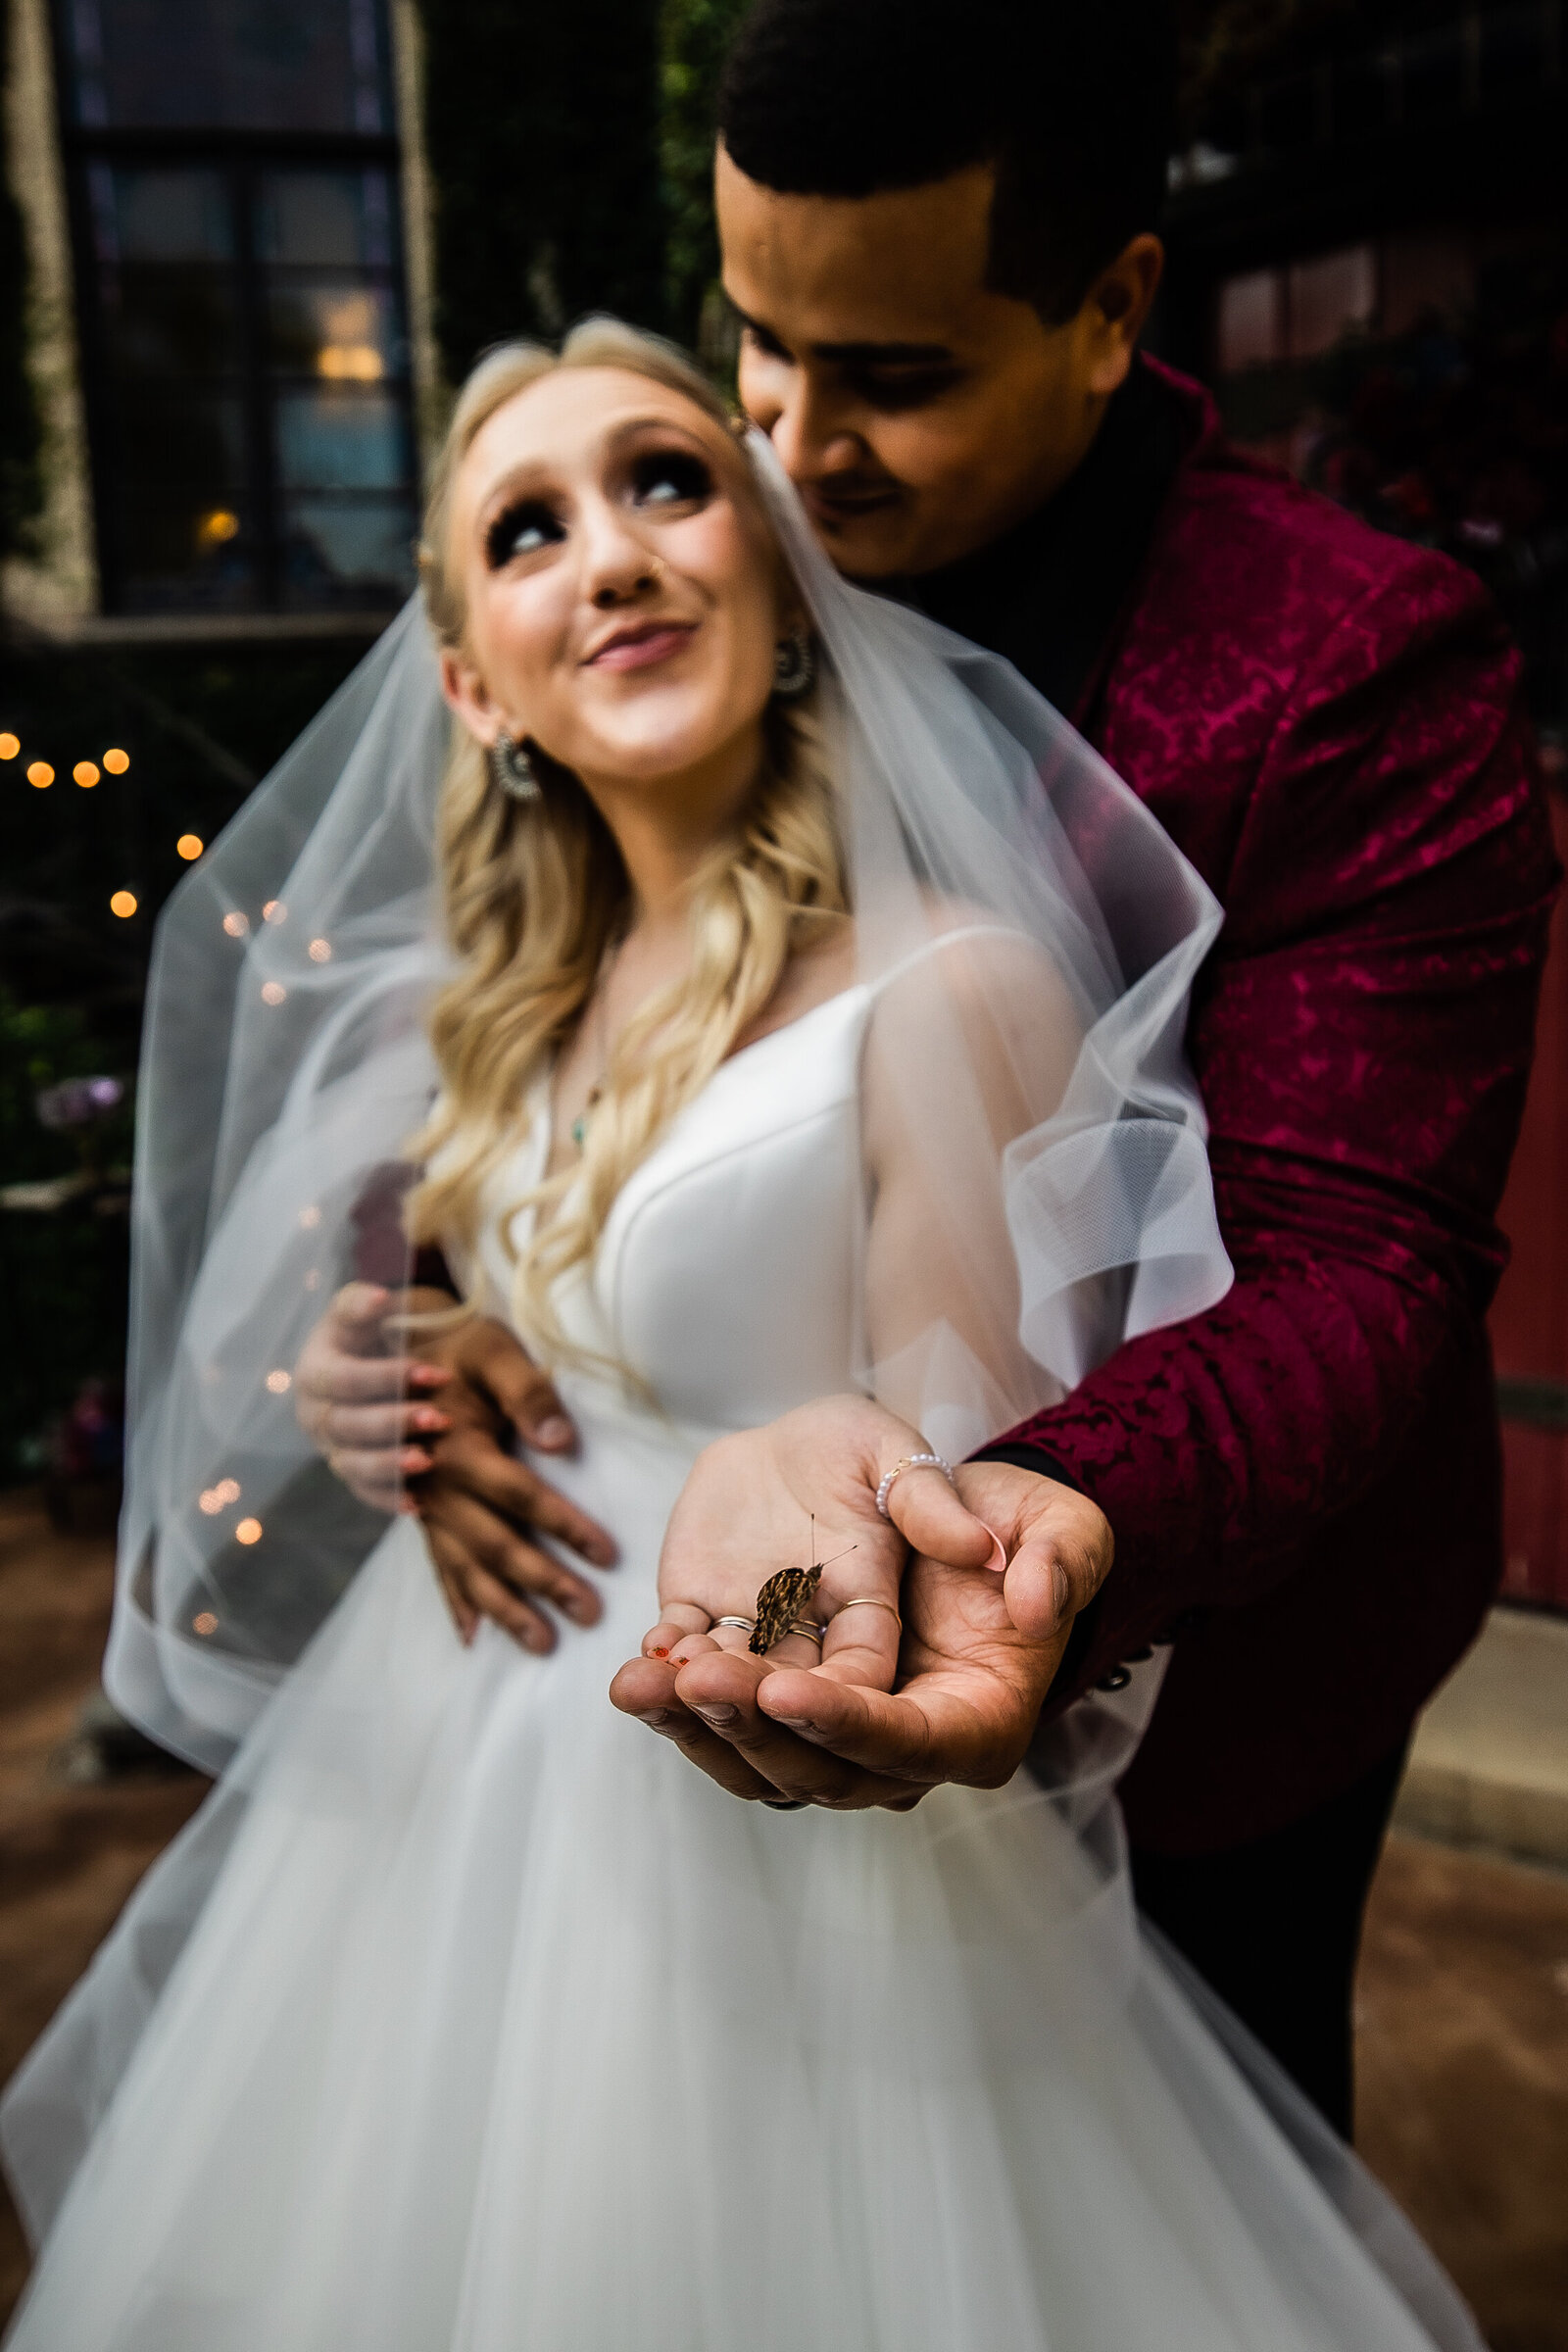 butterfly release at your wedding, alabama weddings